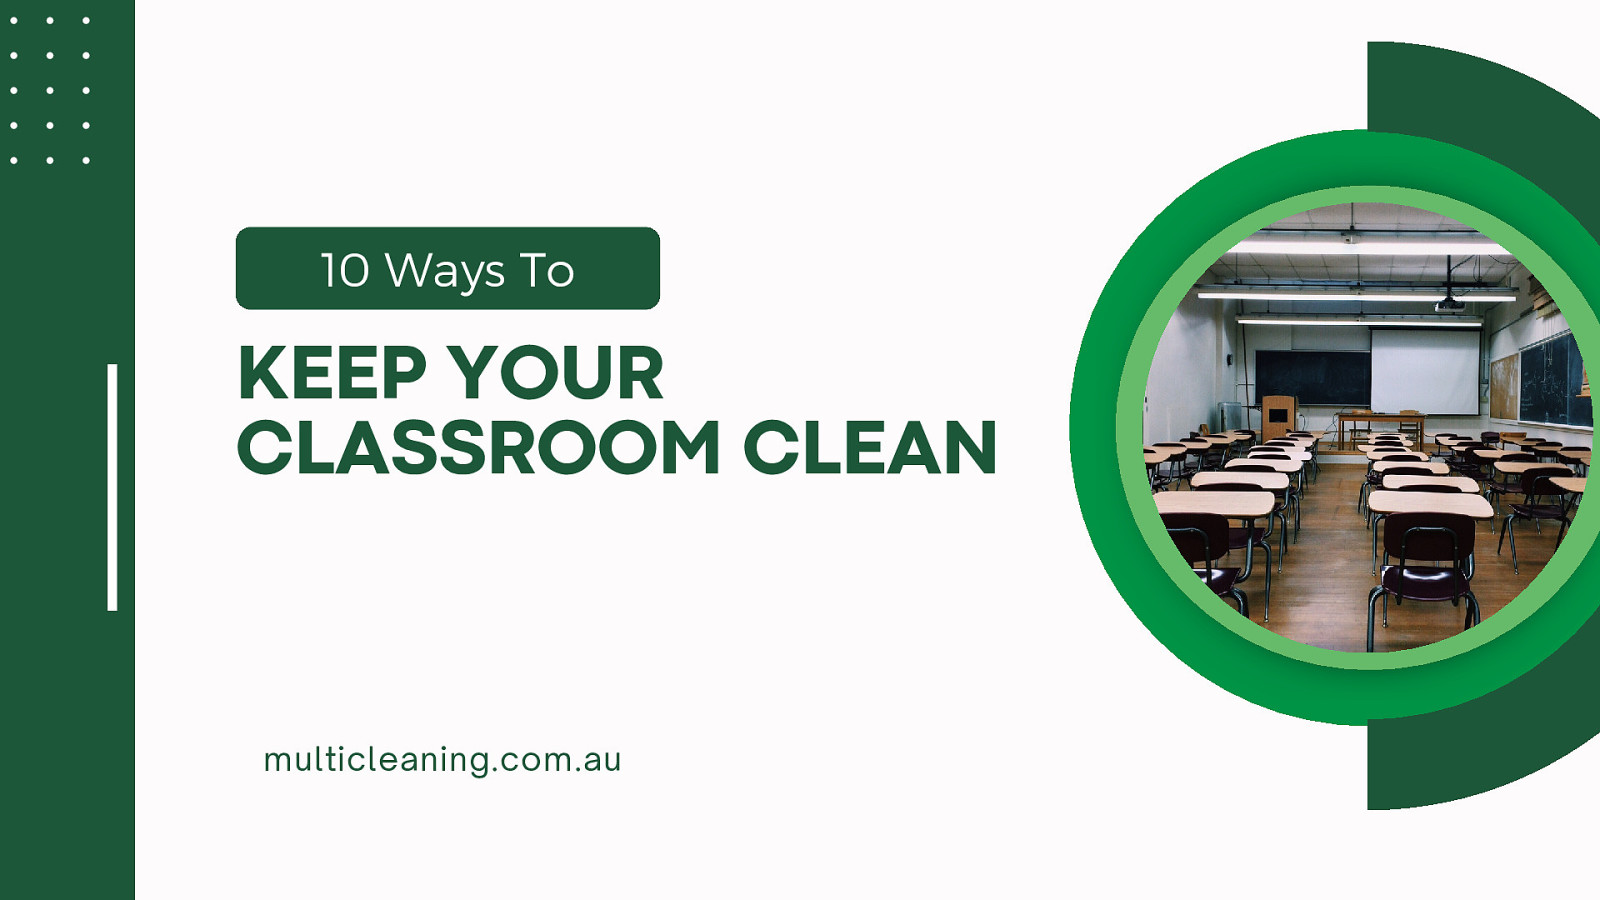 10 Ways To Keep Your Classroom Clean